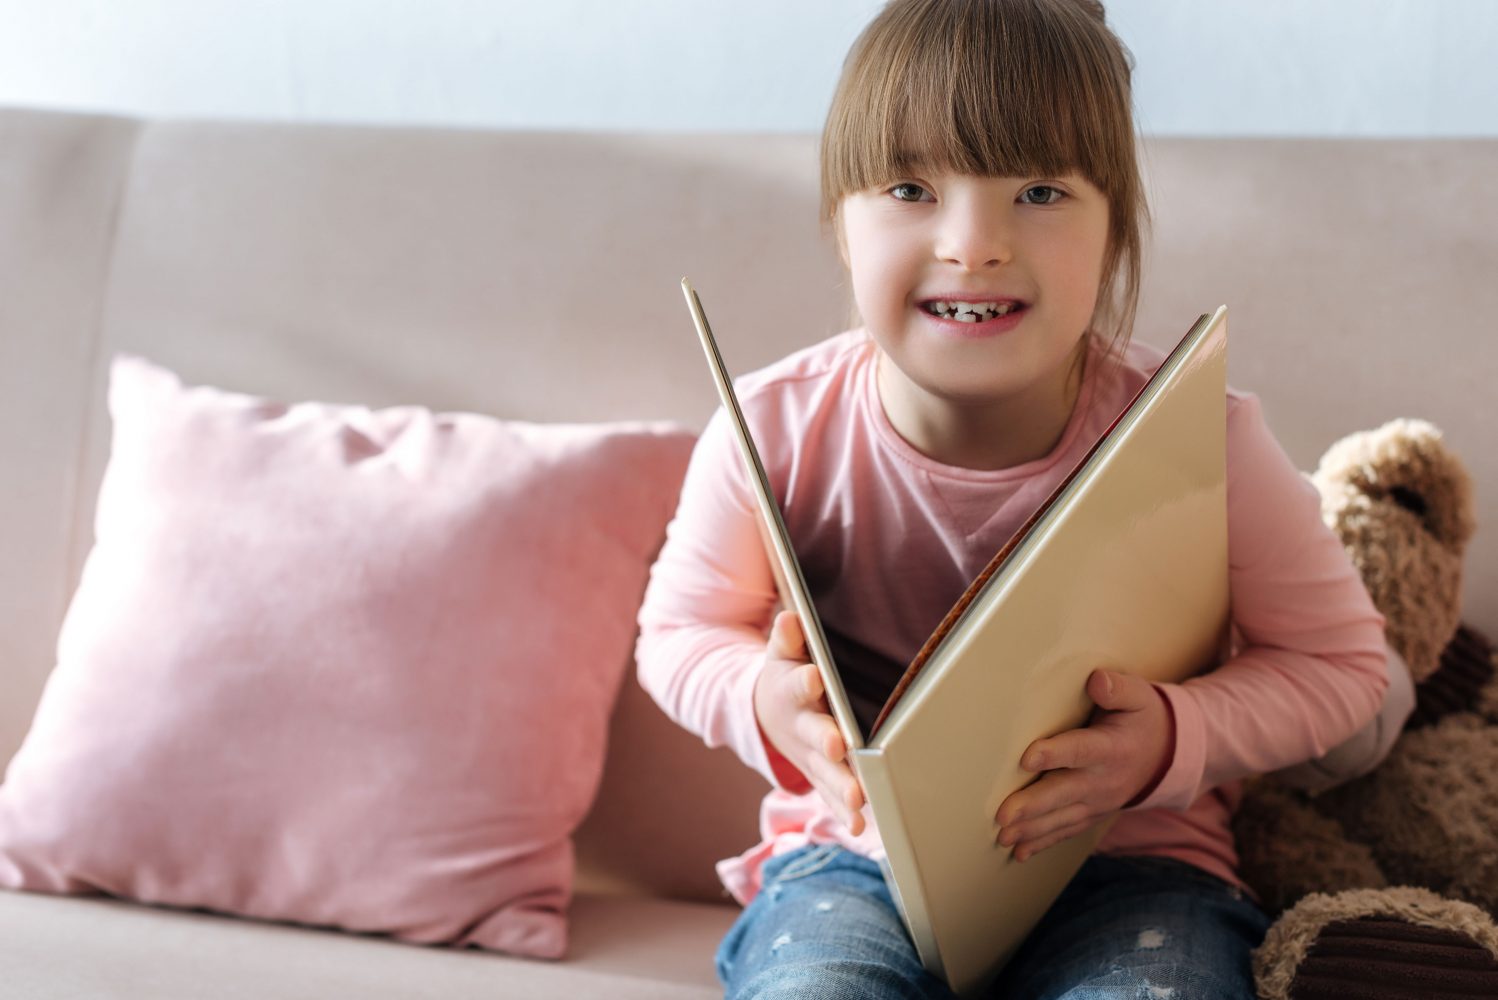 Girl with Down syndrome reads book on couch